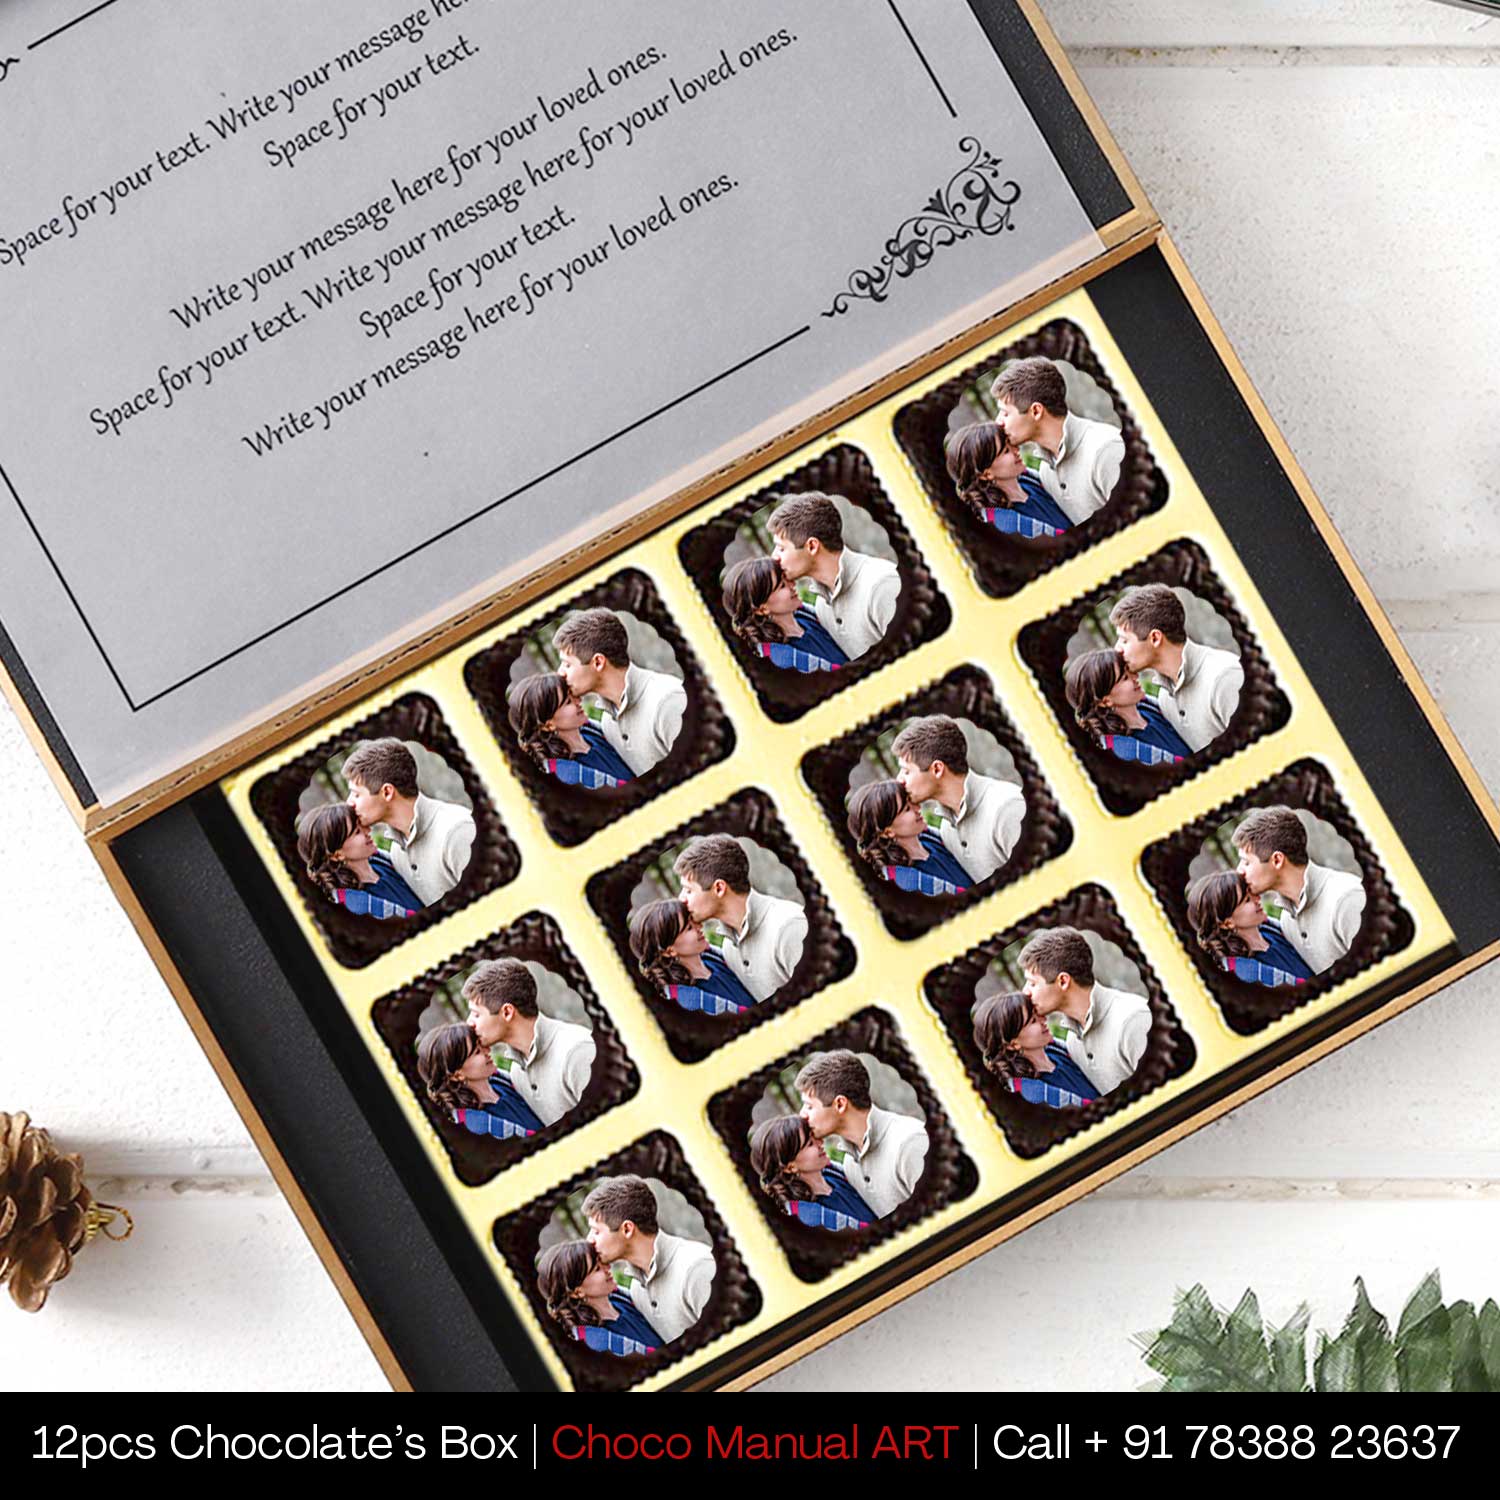 Photo printed chocolates with decorative floral design on box